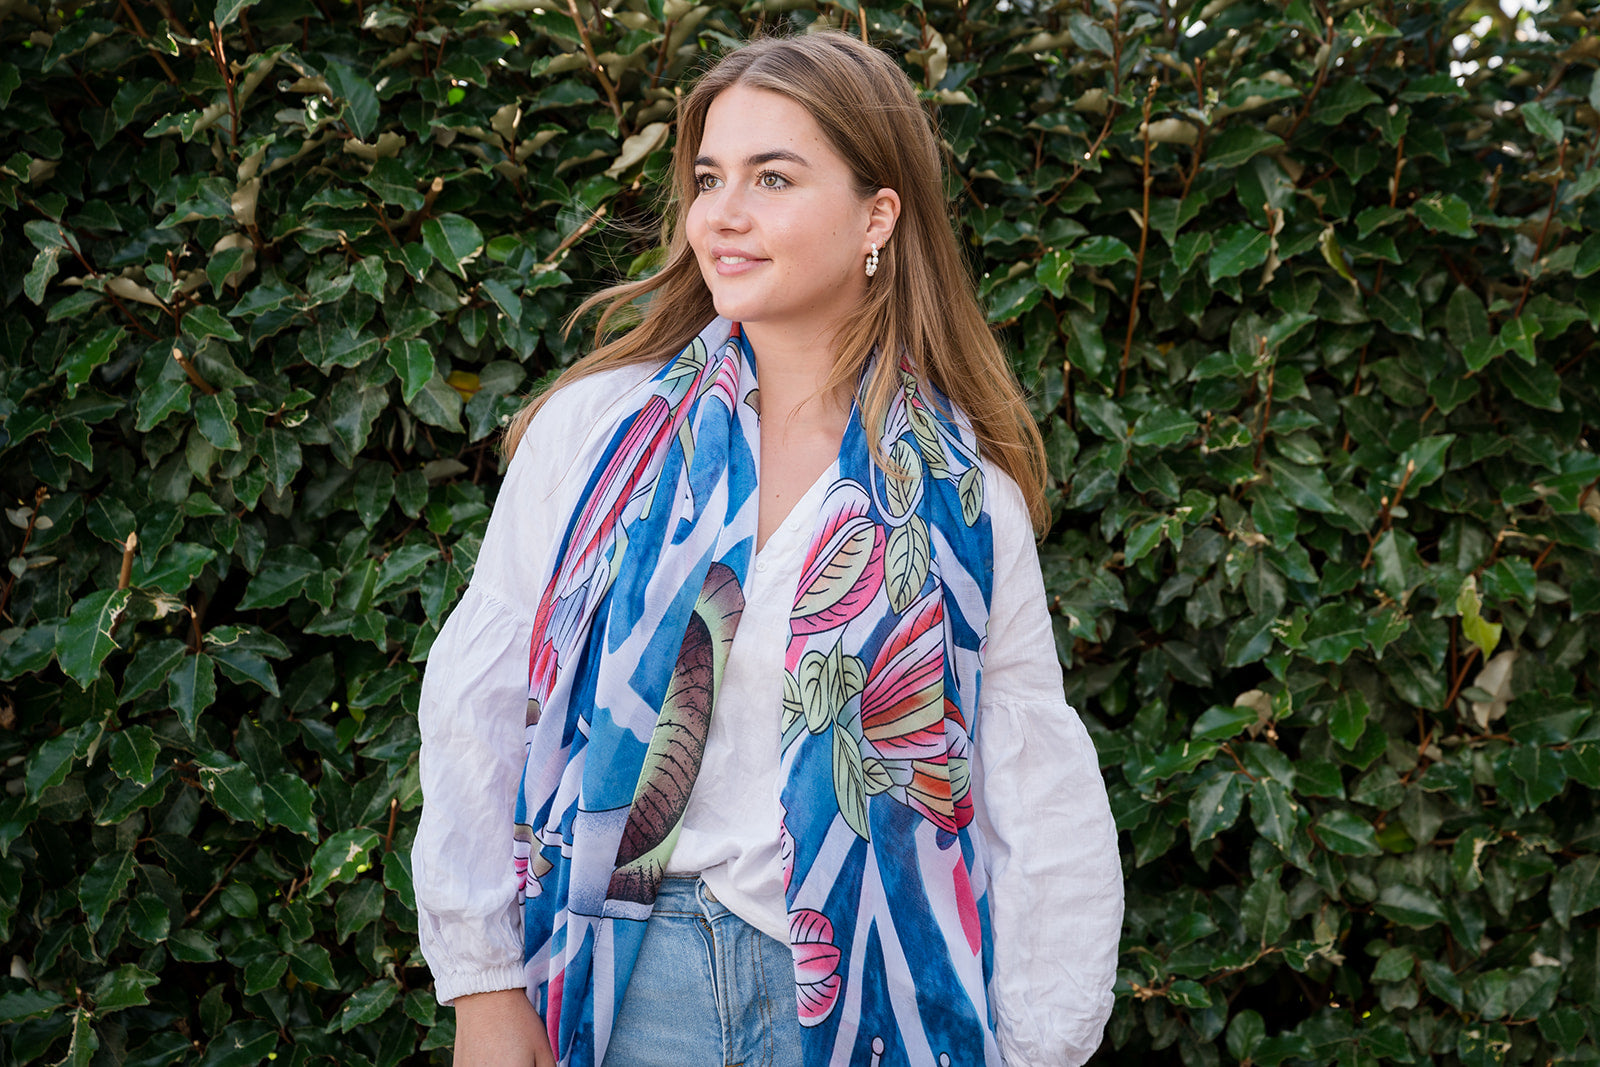 Transform your look with our botanic-inspired scarf, boasting a geometric blue background with bursts of red and green flowers. The elegant floral design against the crisp blue background is complemented by navy-blue tassels, adding sophistication and texture. Ideal for nature enthusiasts, this modern accessory is crafted from a comfortable polyester blend.